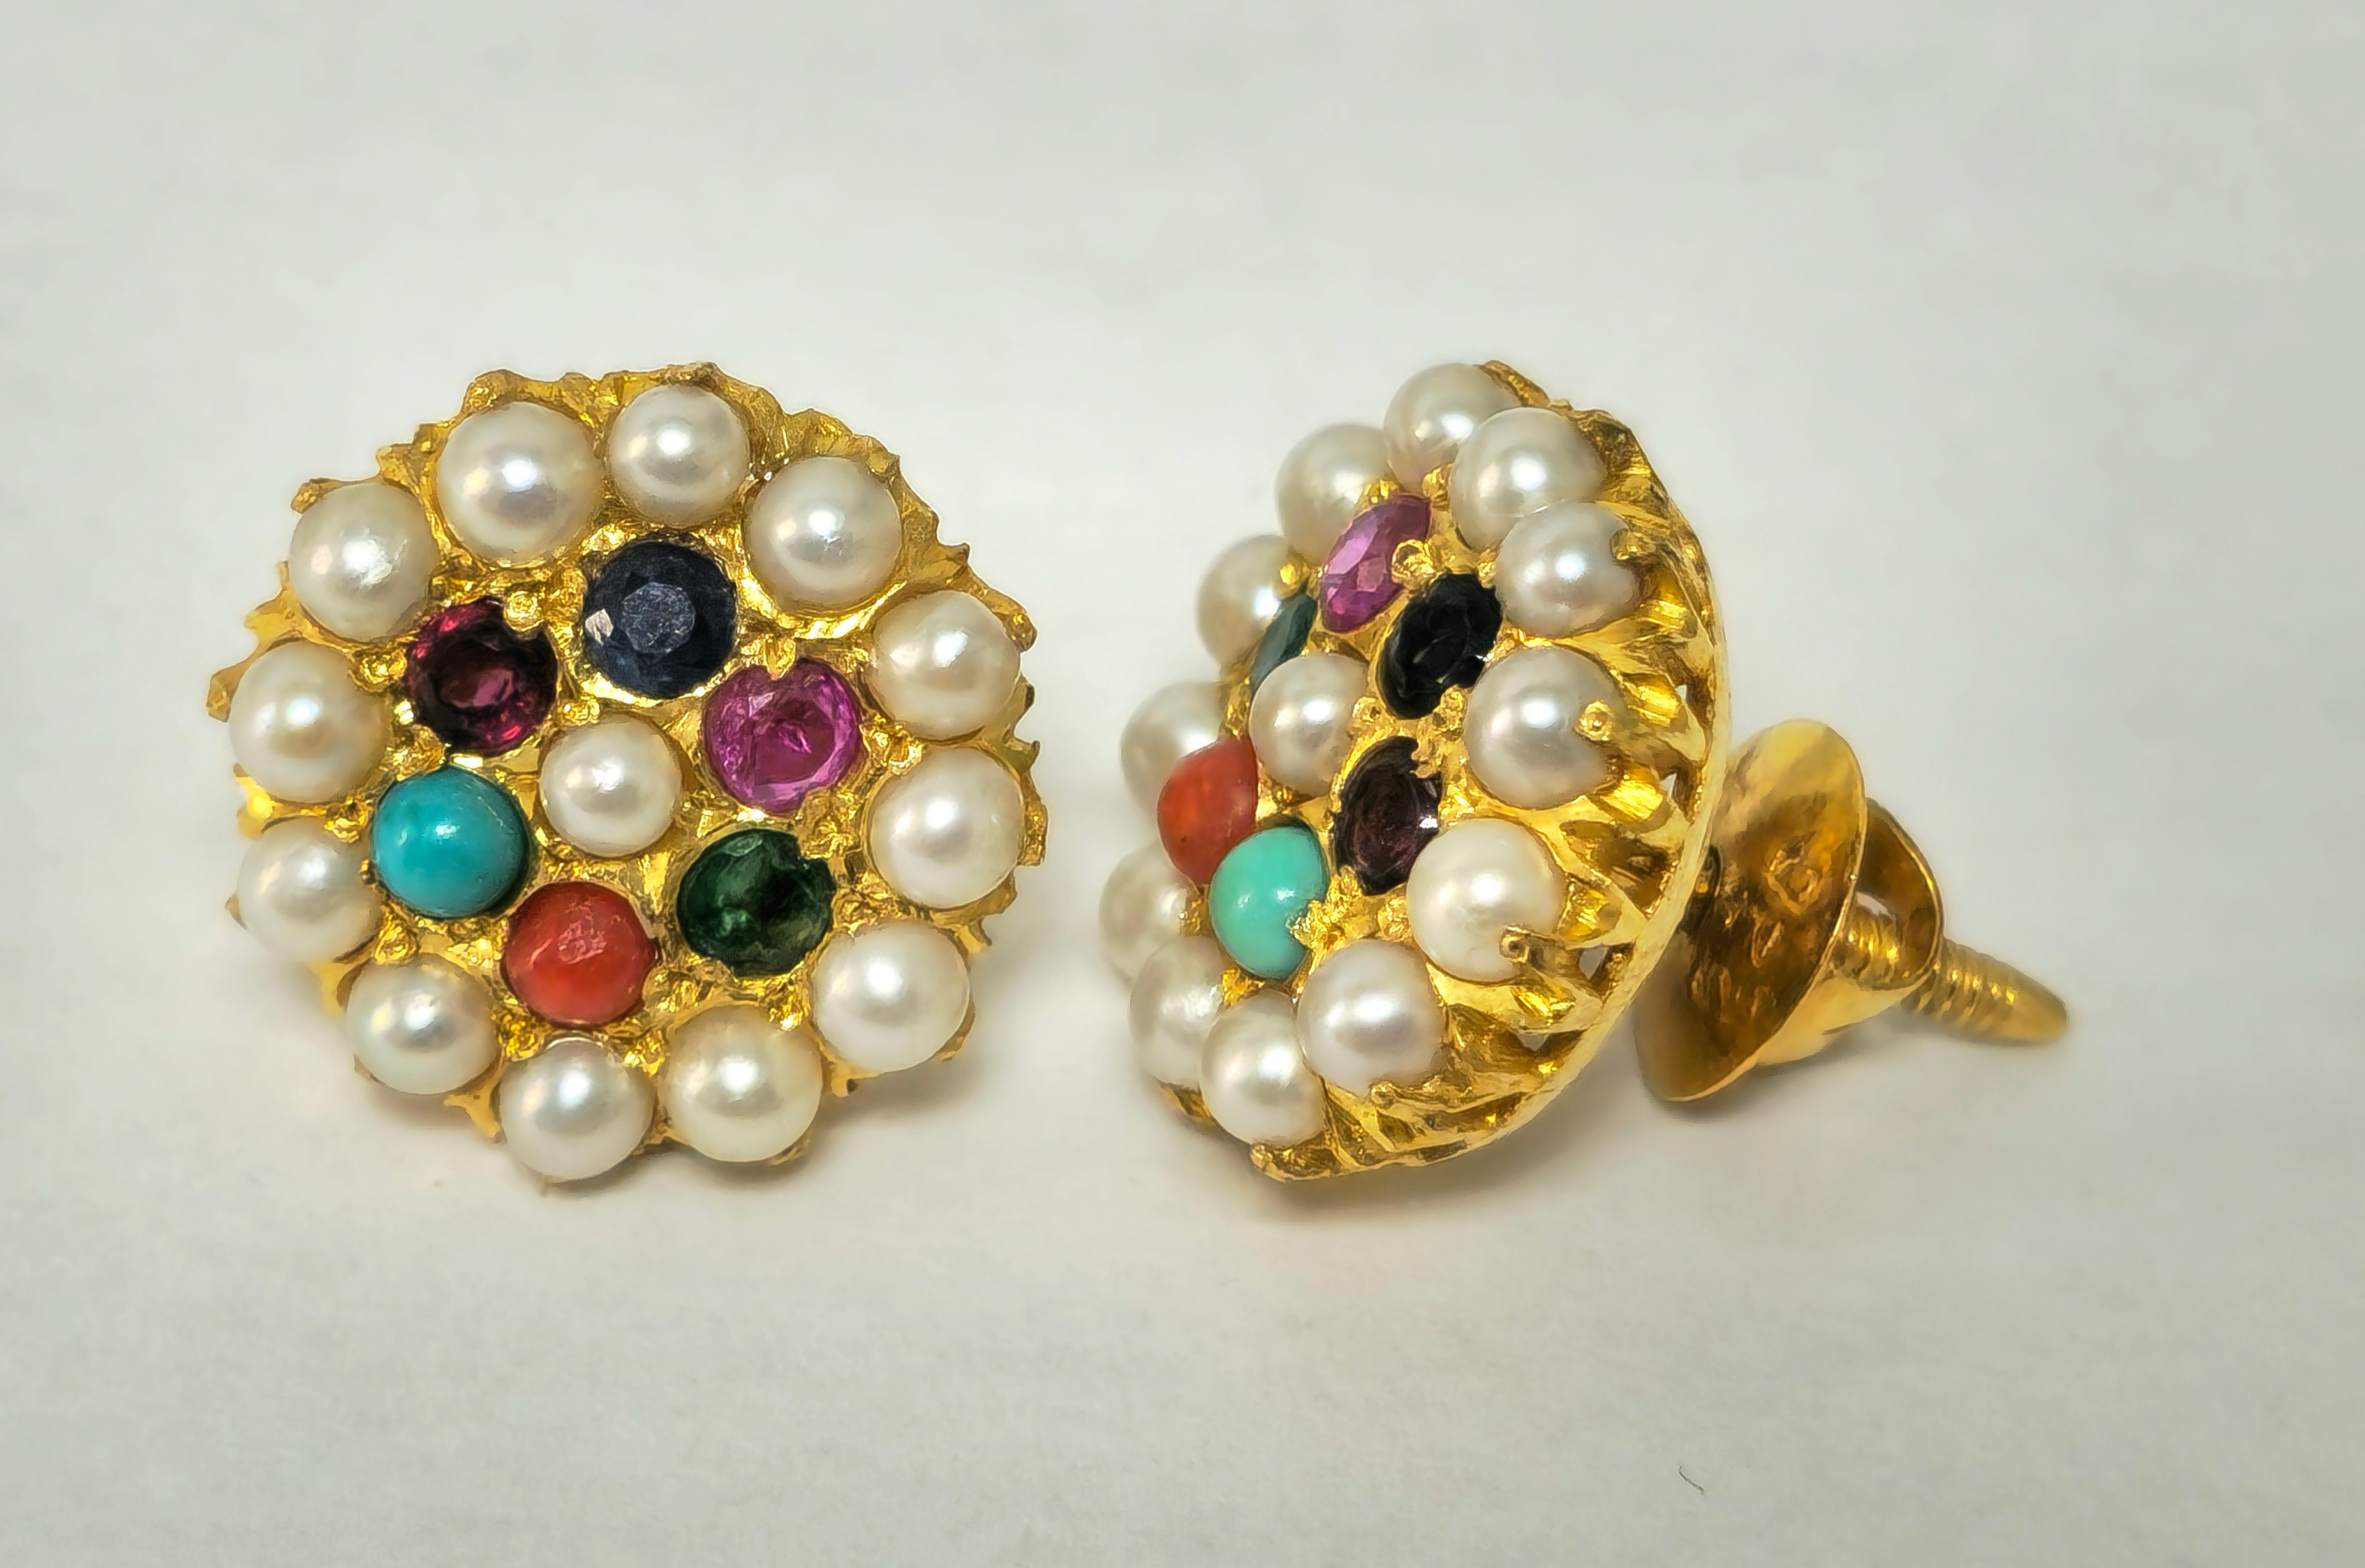 Adorn yourself with the exotic allure of these unique vintage earrings, crafted from radiant 22k yellow gold. Each earring features an enchanting array of gemstones including pearls, emeralds, rubies, blue sapphires, coral, pink sapphires, and